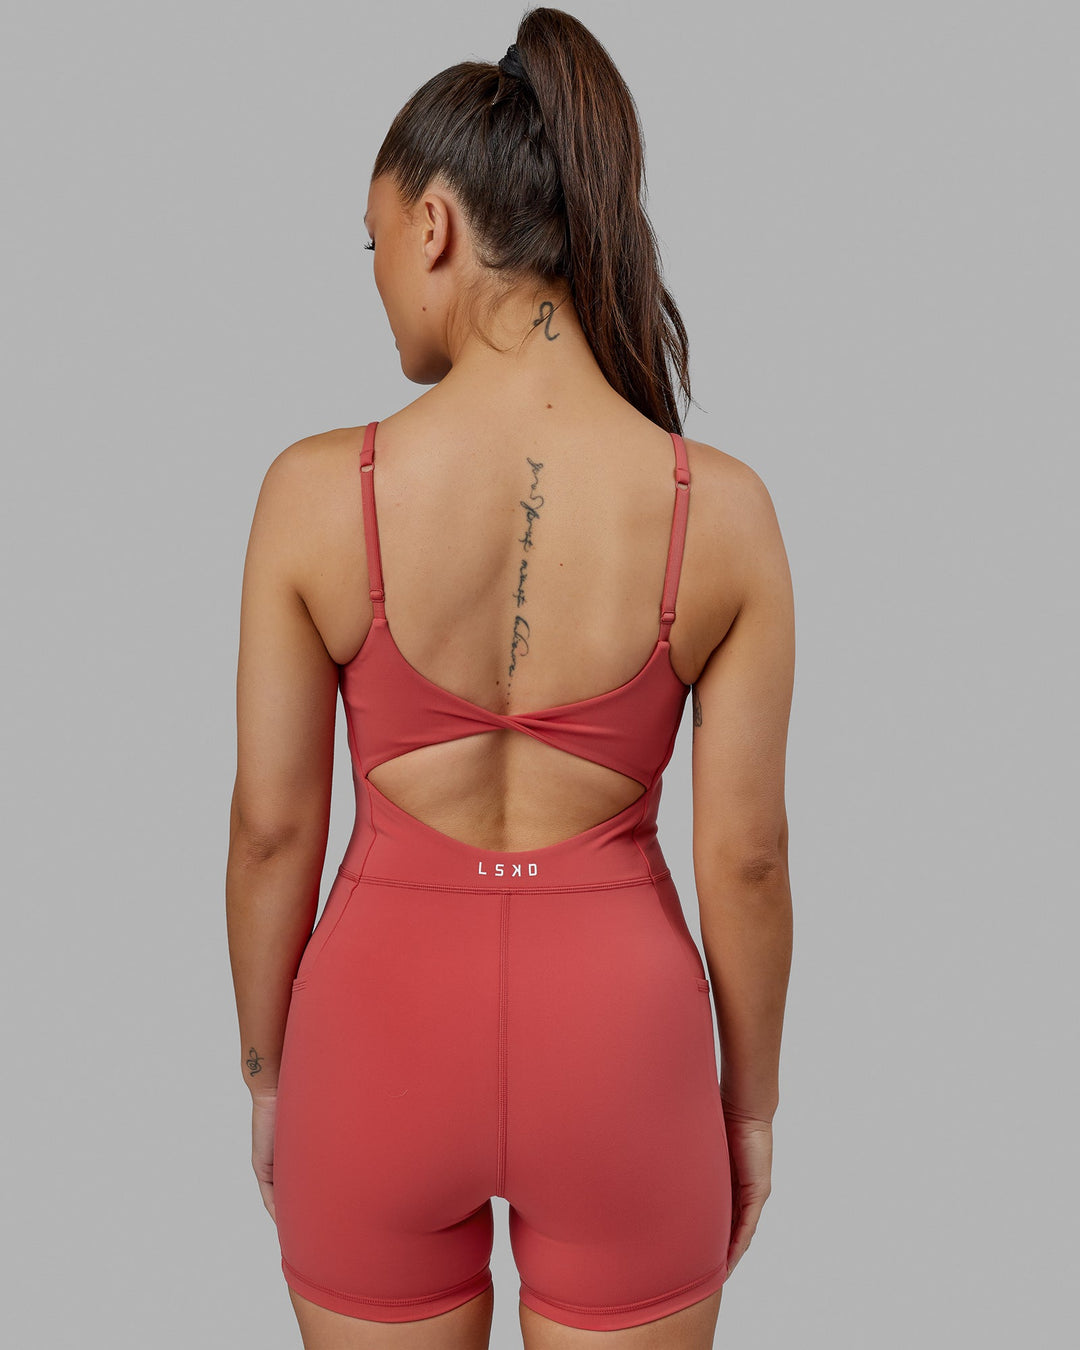 Helix Active Bodysuit - Mineral Red